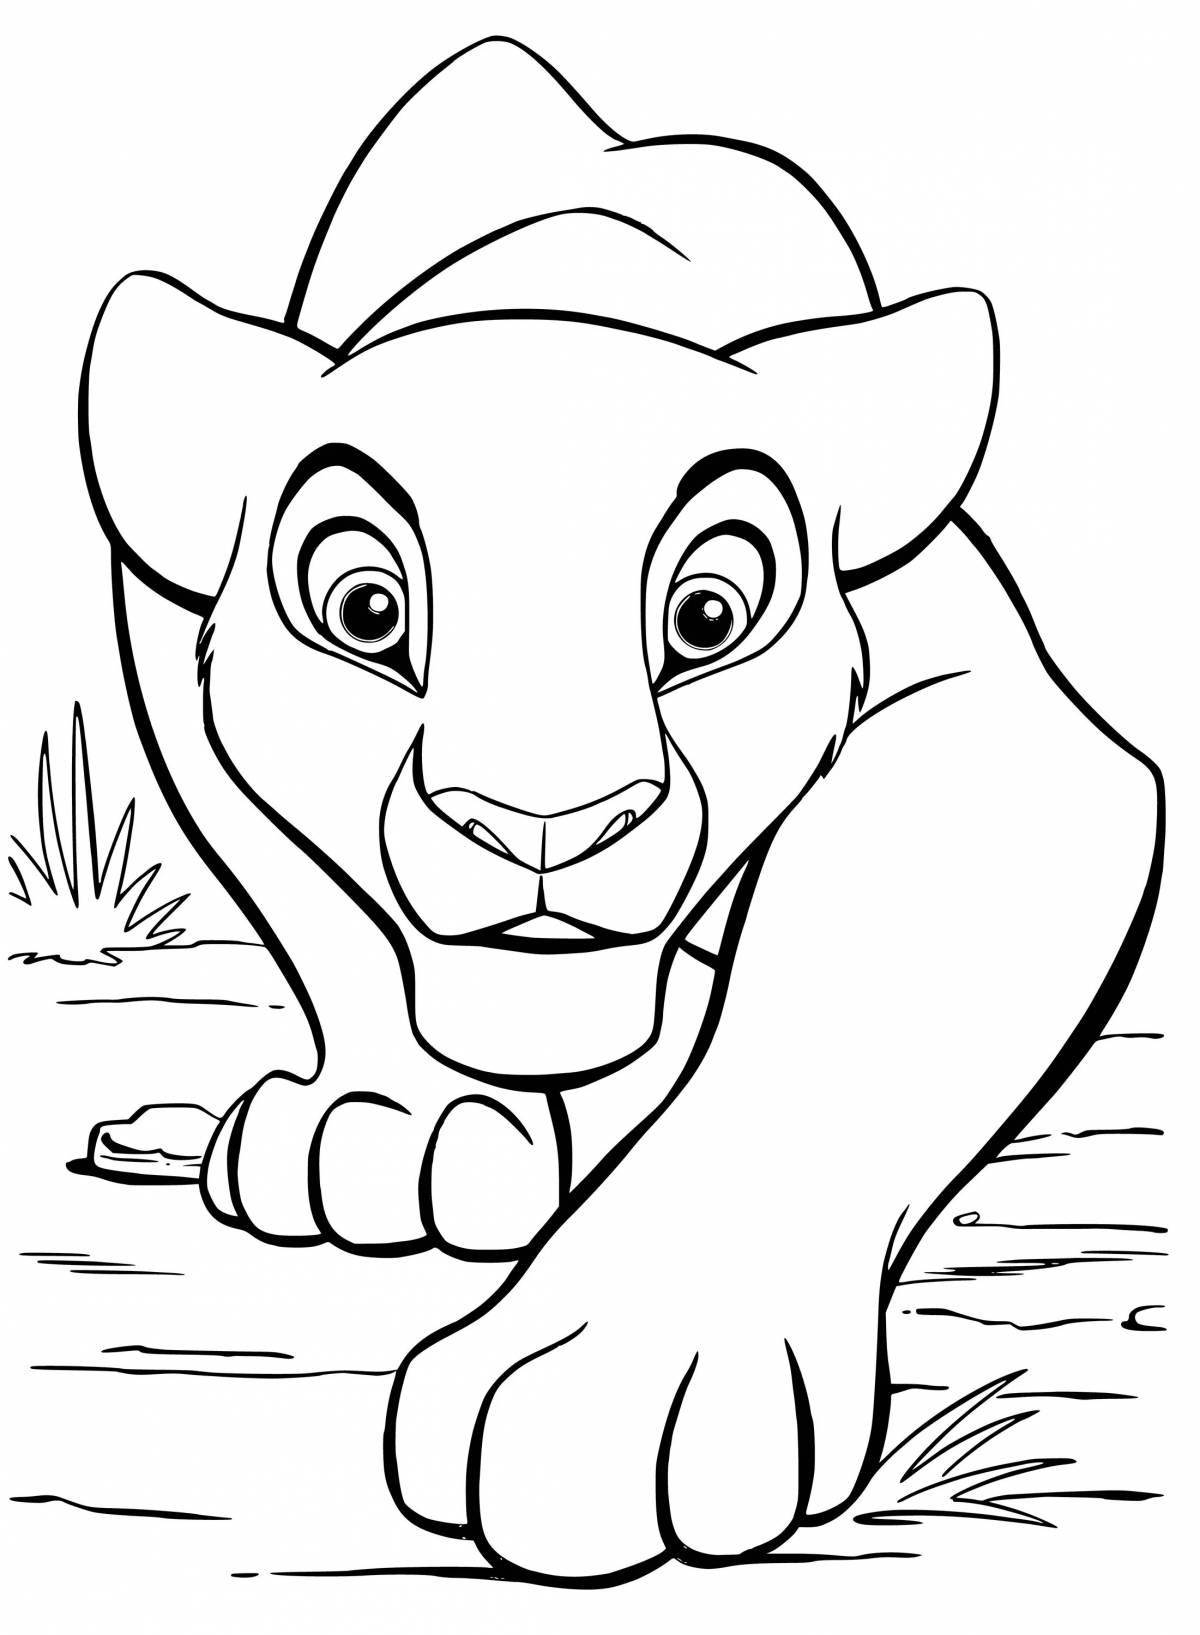 Color-explosion coloring page how to draw a coloring book